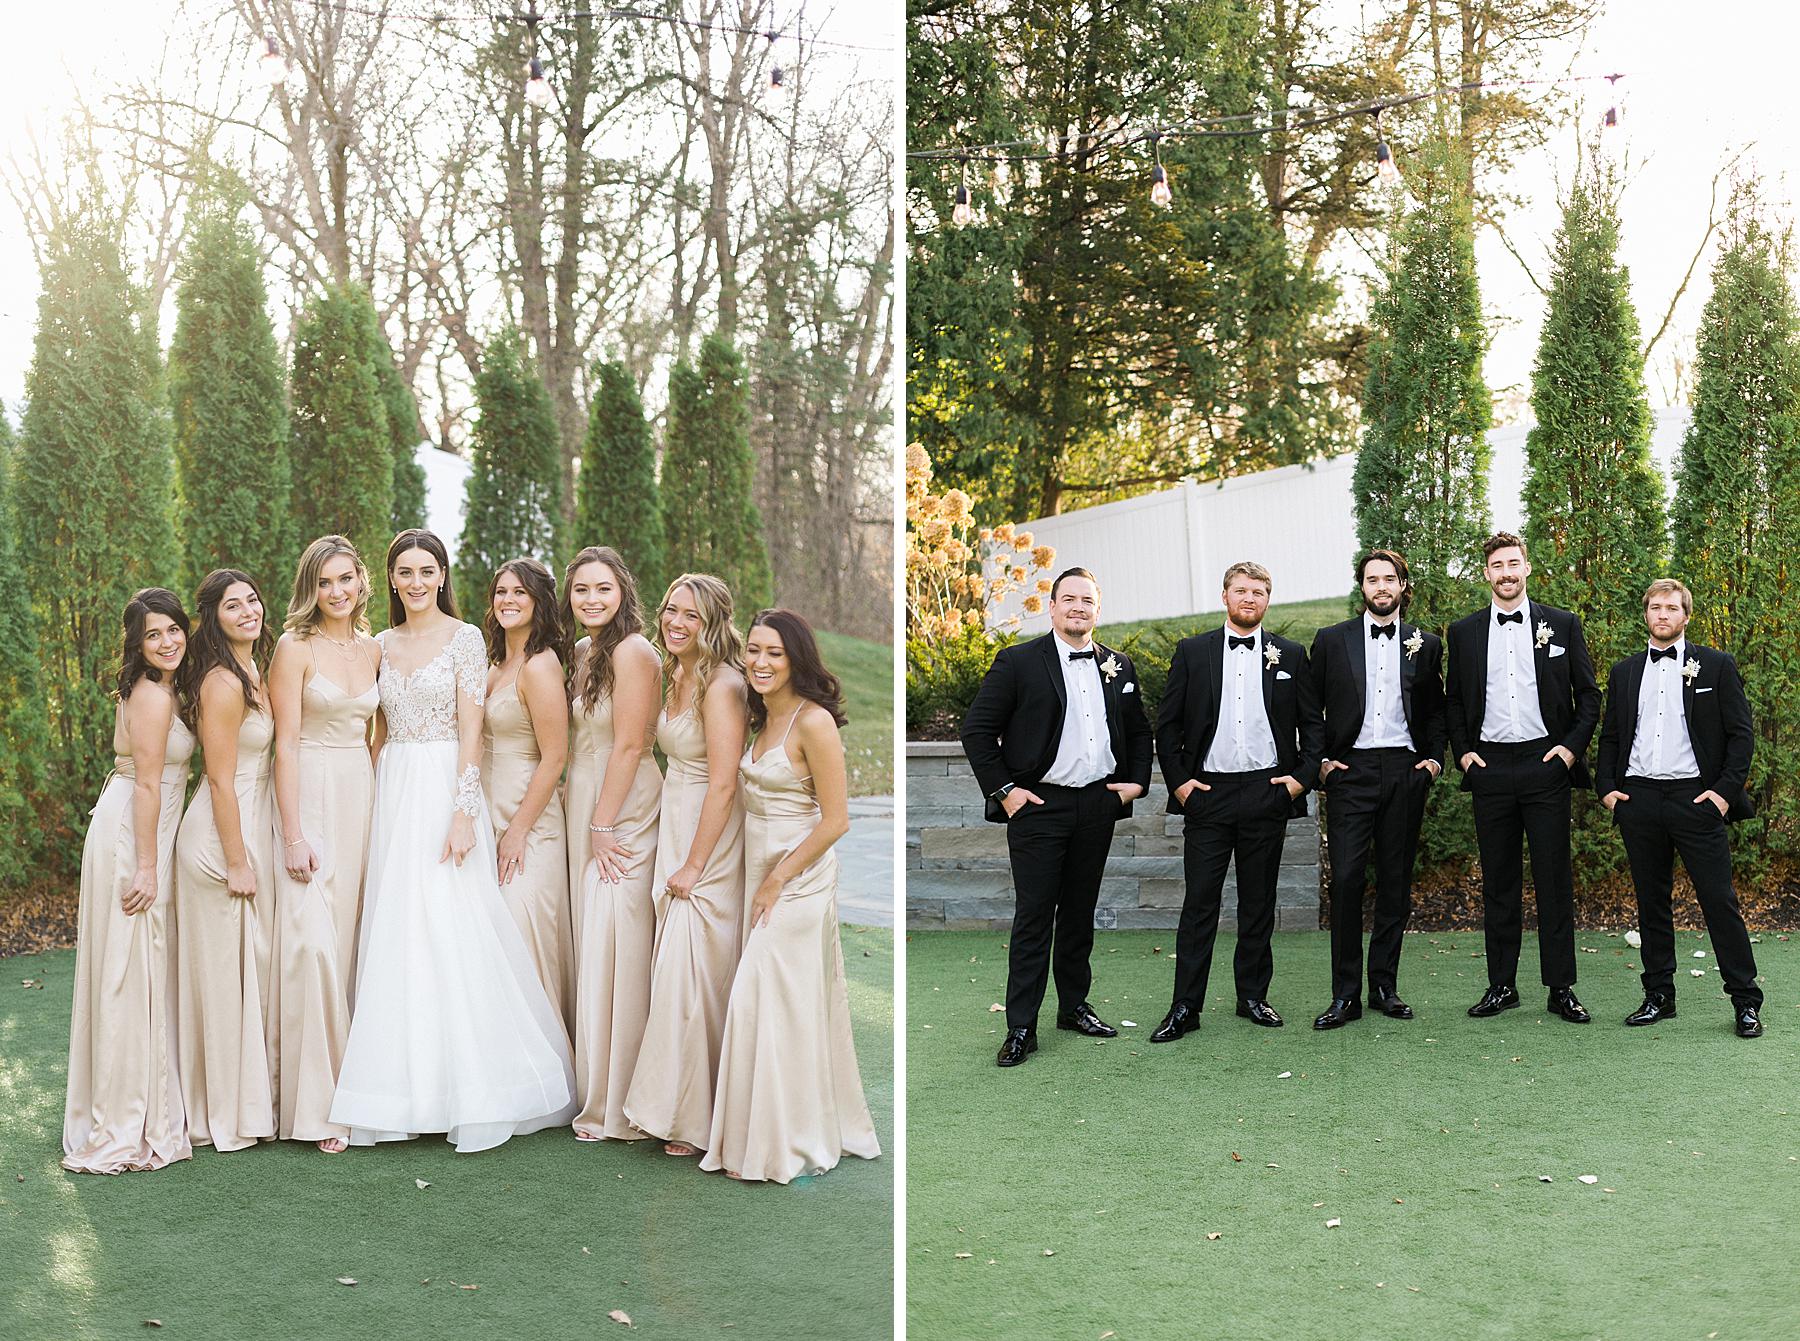 bride in white lace long sleeve gown walking with bridesmaids in nude champagne off-white dresses and groom and groomsmen in black suits